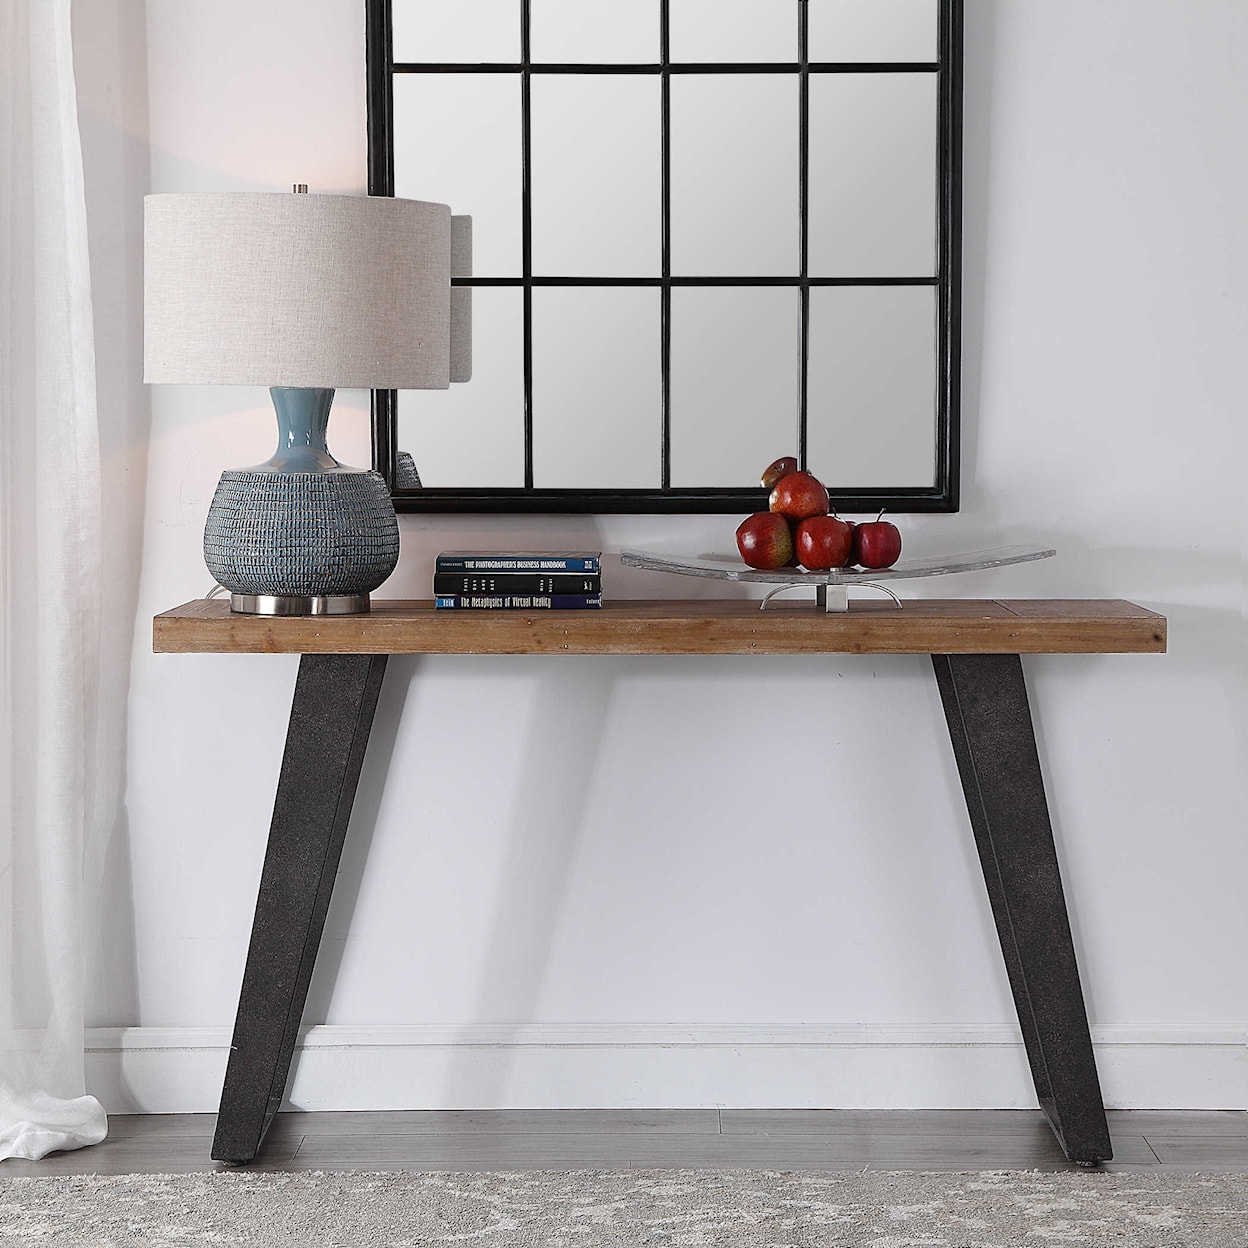 Uttermost Accent Furniture - Occasional Tables Freddy Weathered Console Table